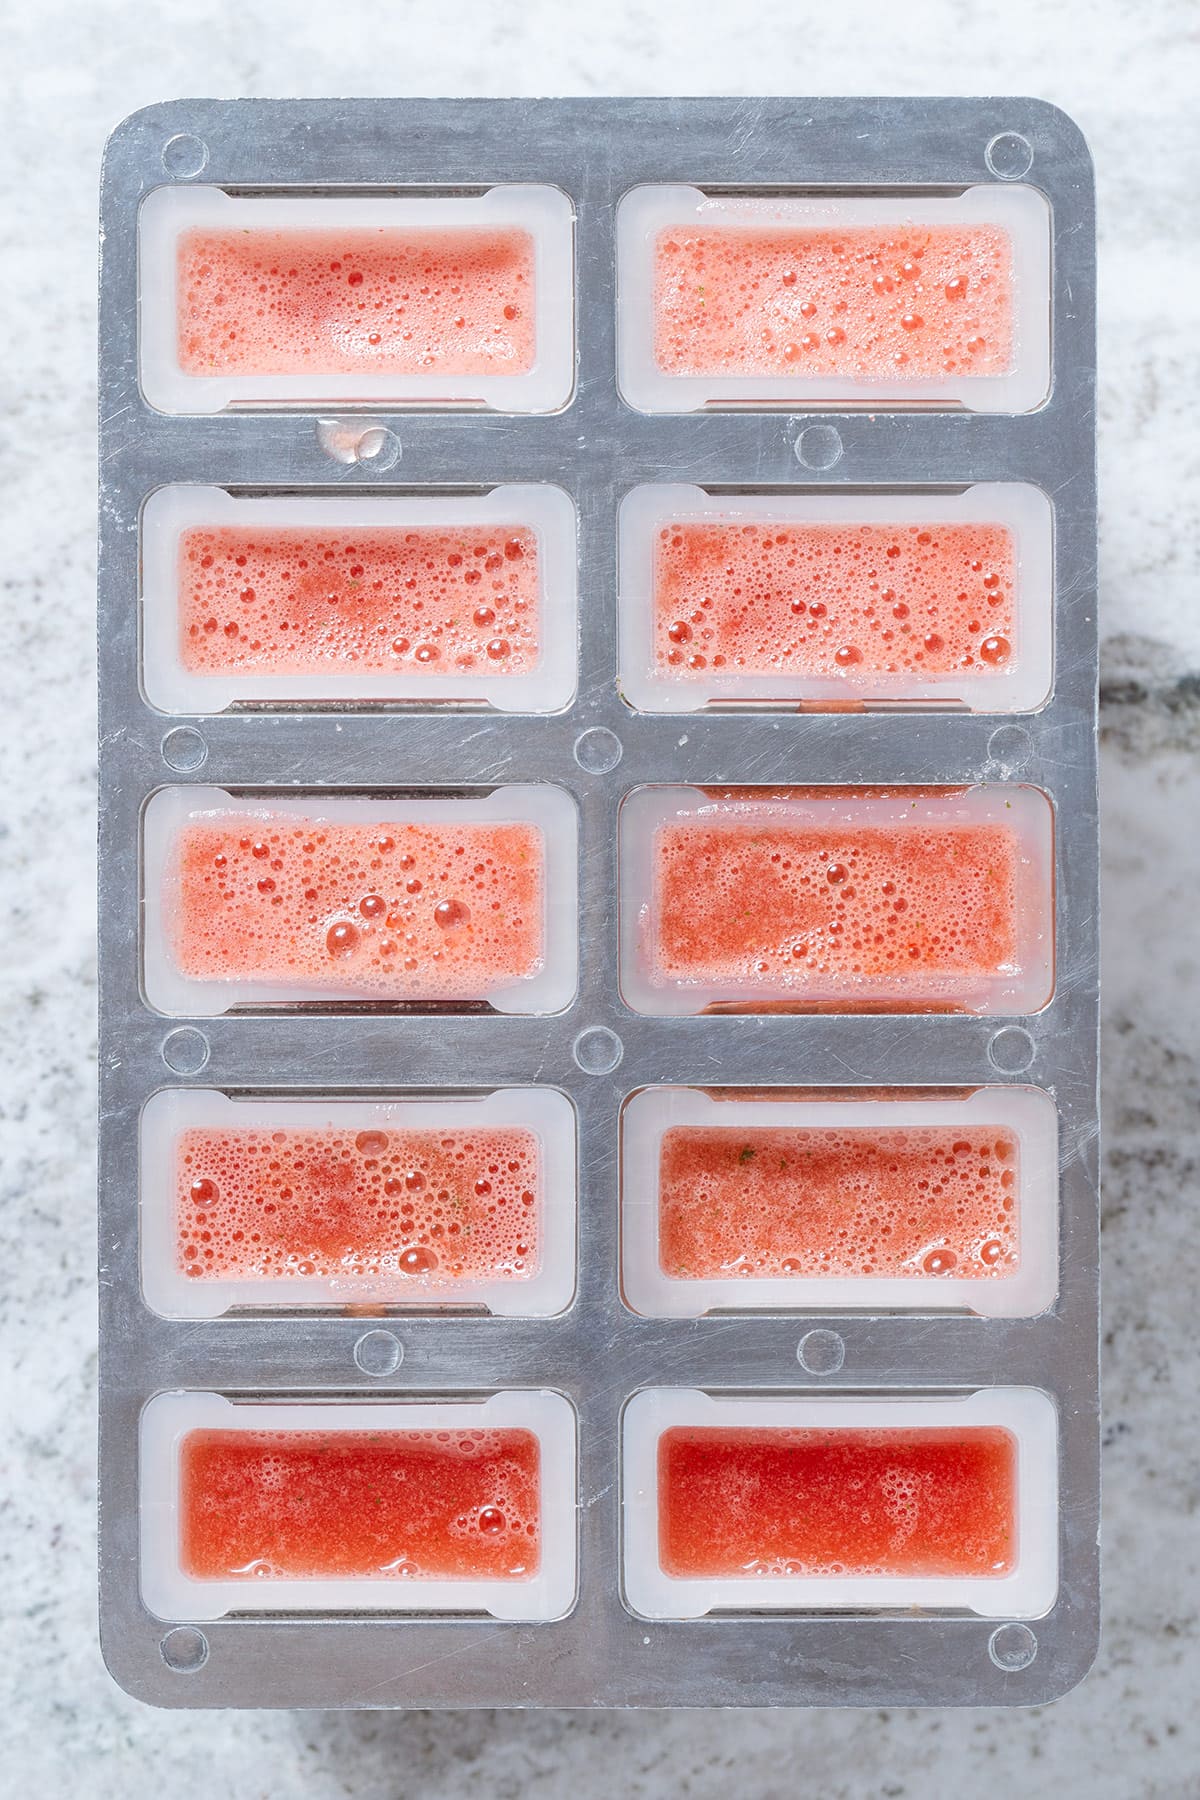 Blended watermelon in popsicle molds before freezing.